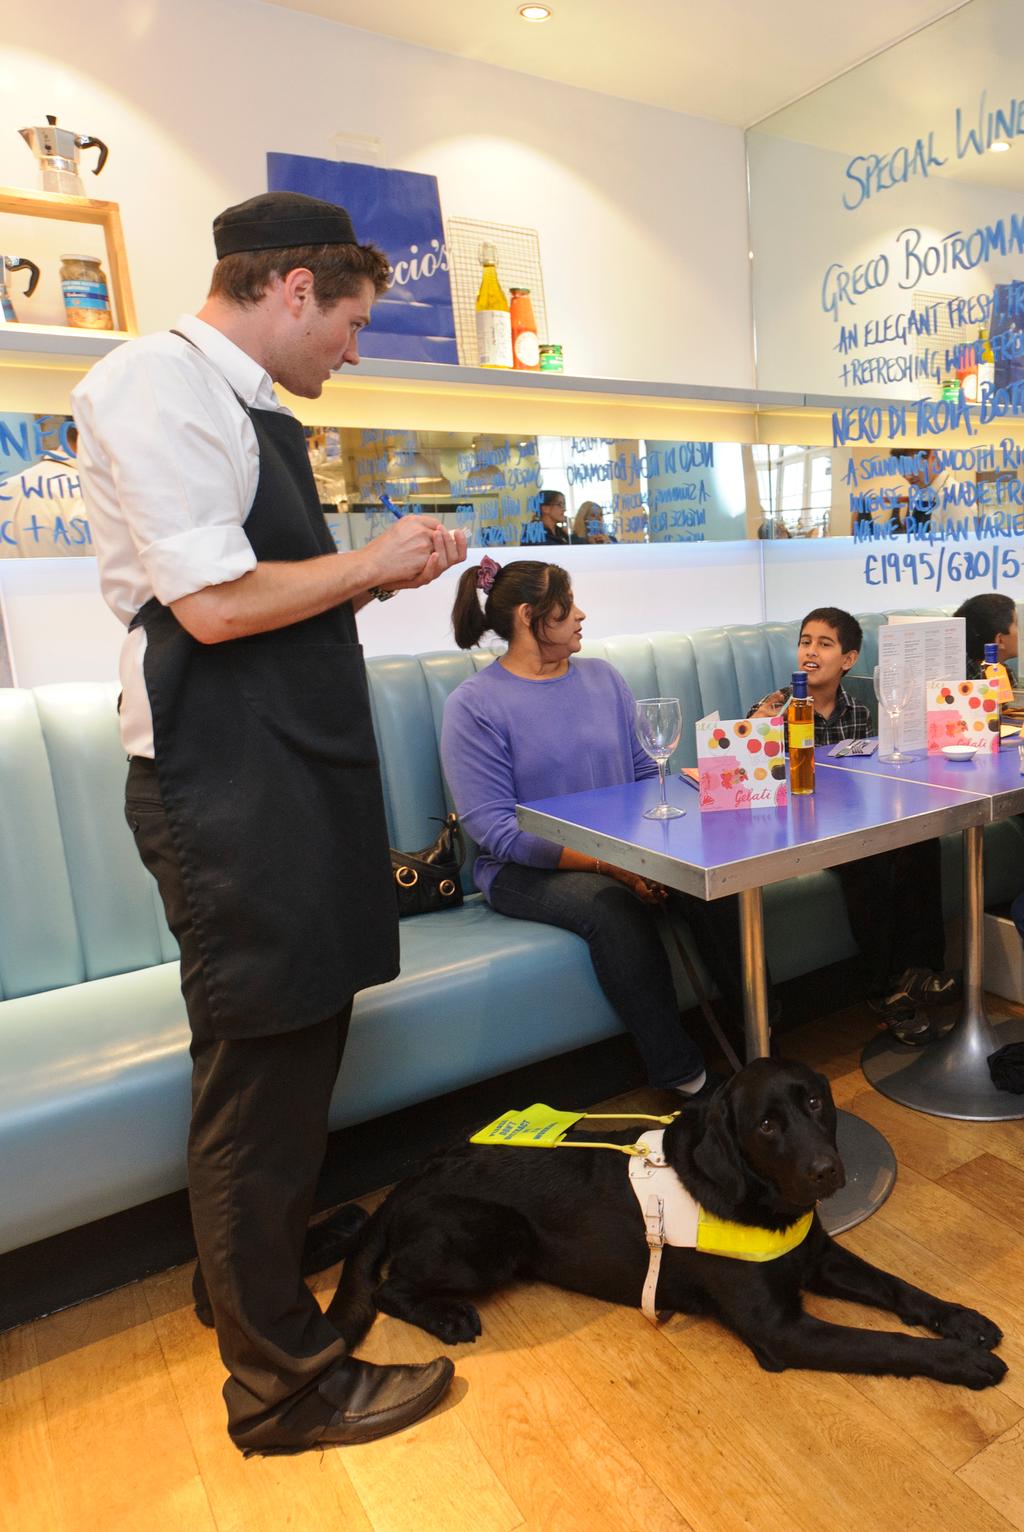 Access to food premises for guide dog owners